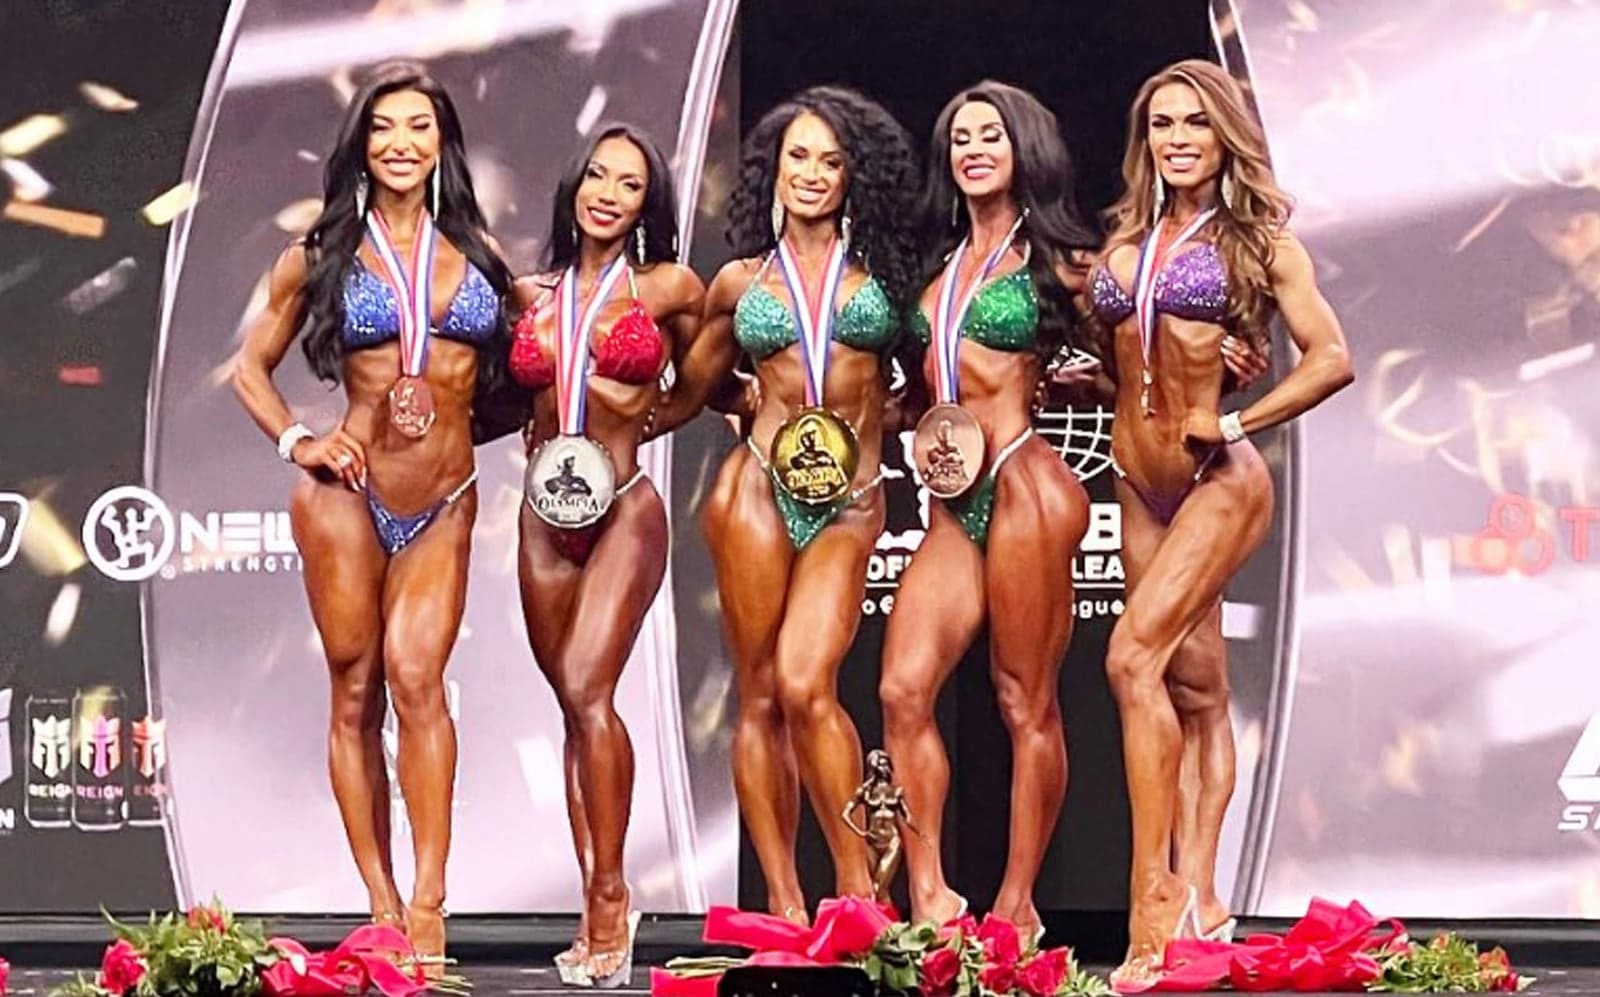 Highest Rated NPC Competition Suits for Bikini, Figure, and